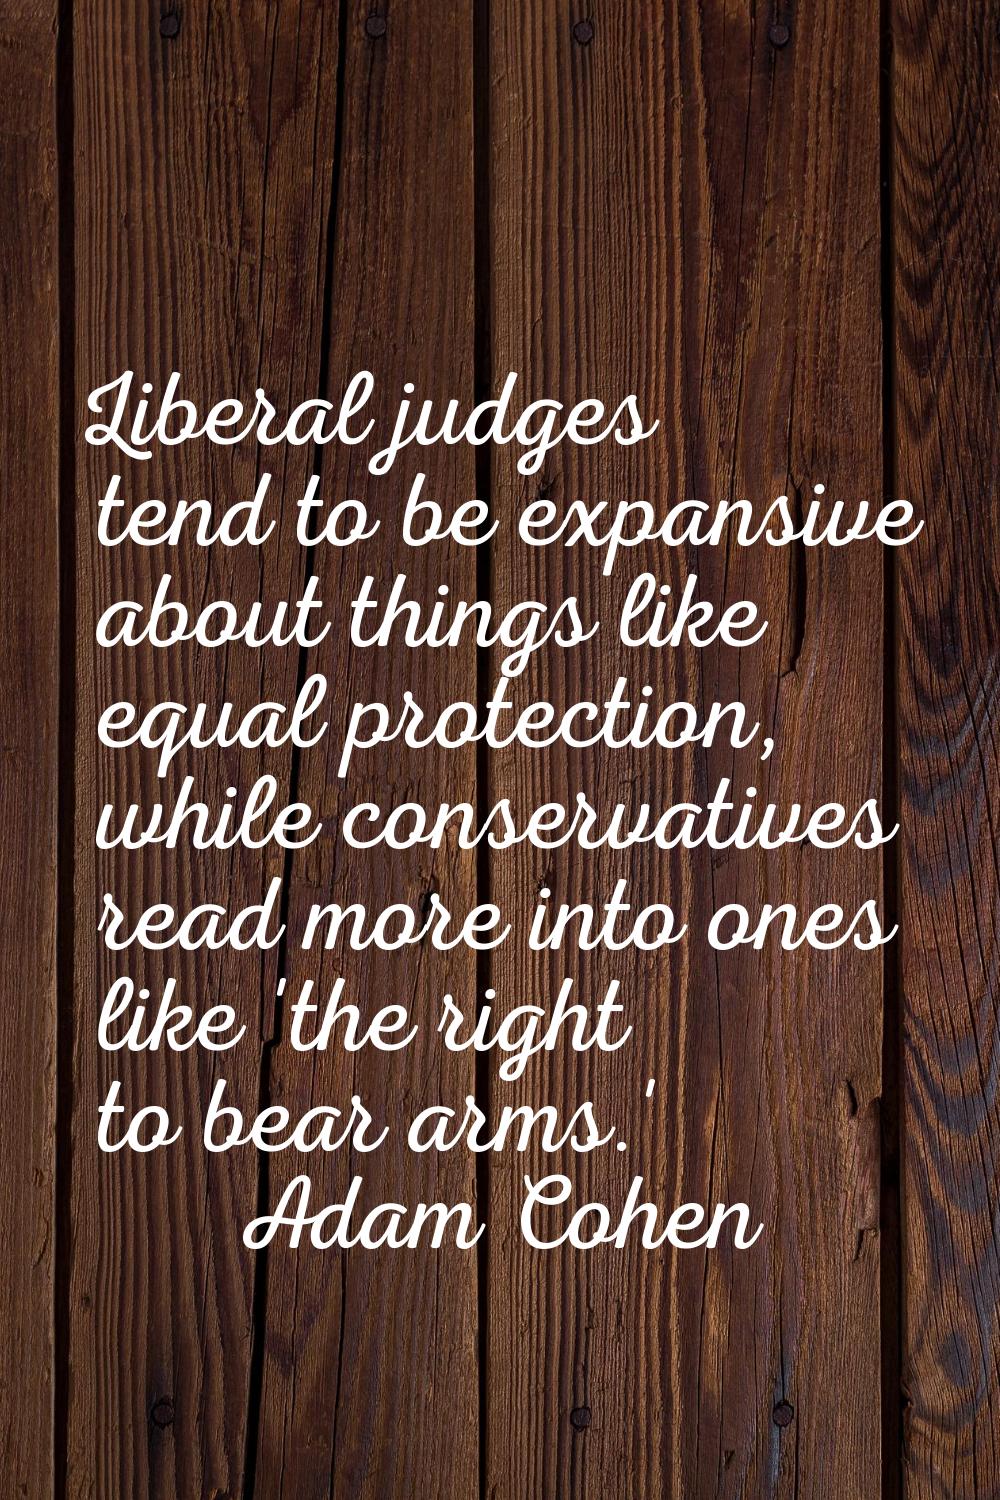 Liberal judges tend to be expansive about things like equal protection, while conservatives read mo